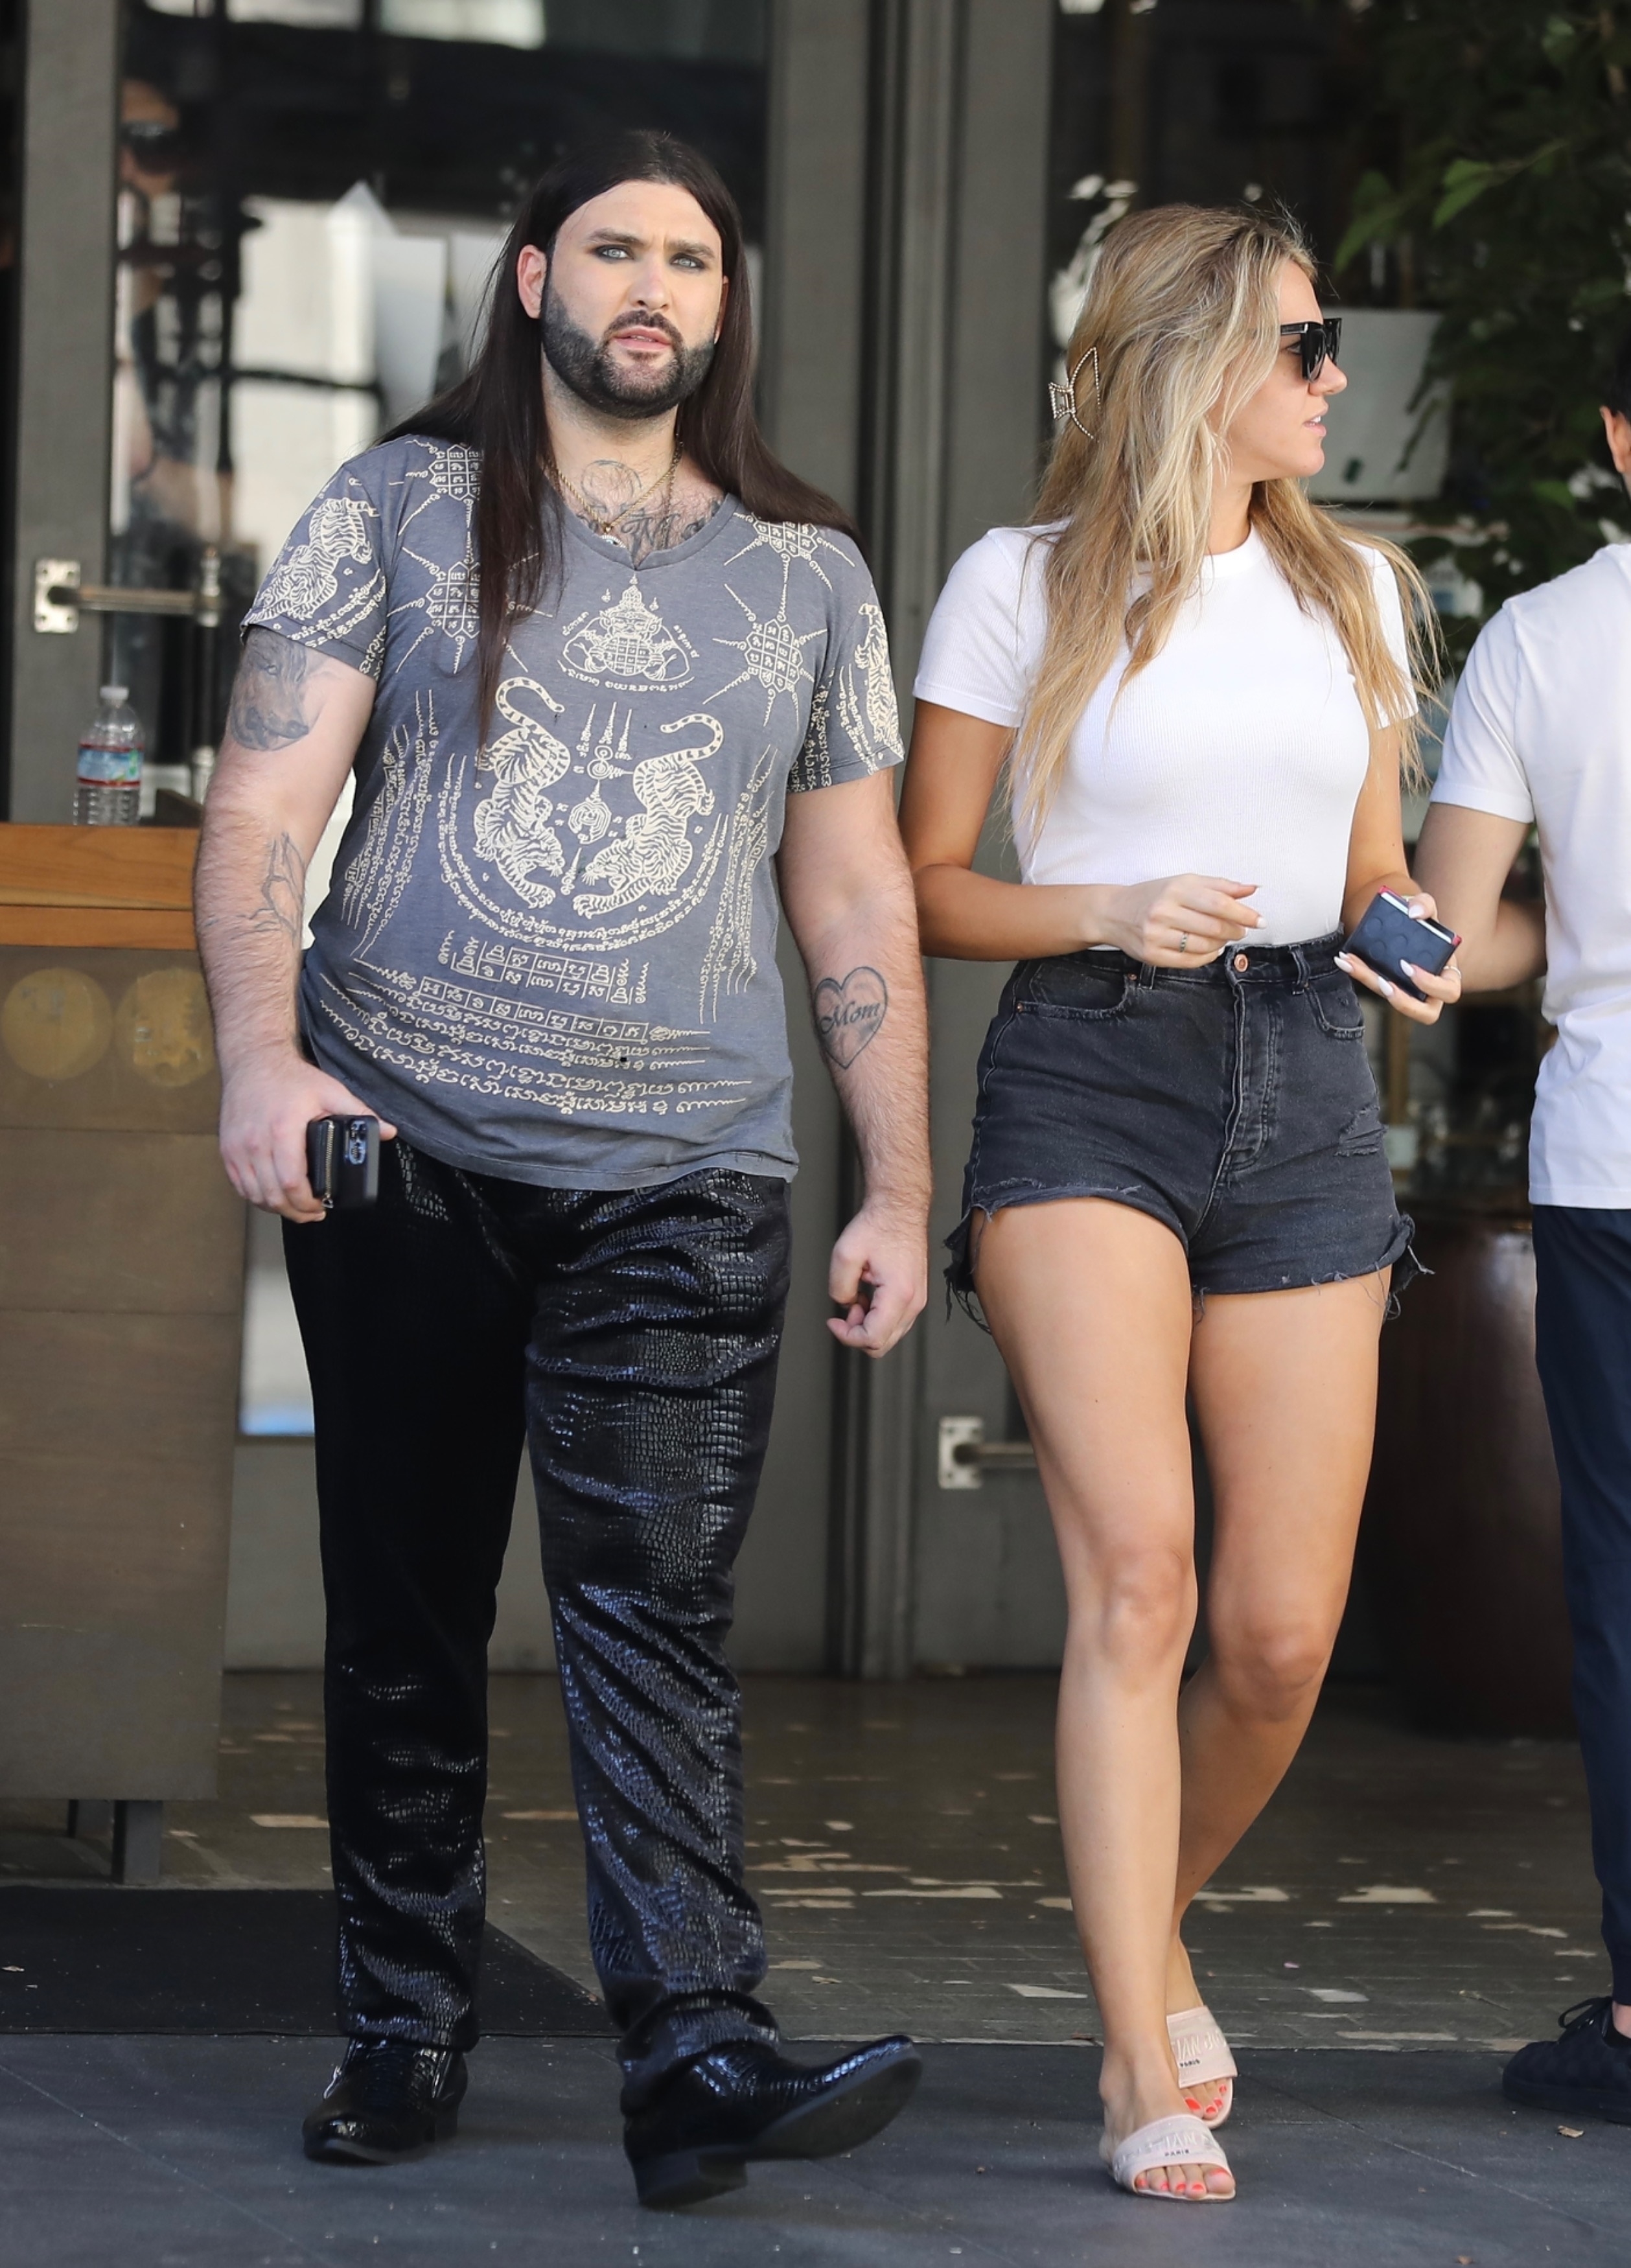 <p>Musician and occasional actor Weston Cage Coppola (who was born in 1990) -- who's a dad of four with two of his three ex-wives -- was photographed in Los Angeles on Sept. 26, 2022. Weston's mom is Christina Fulton, a model-actress who dated his dad, Nicolas Cage, in the late '80s.</p>